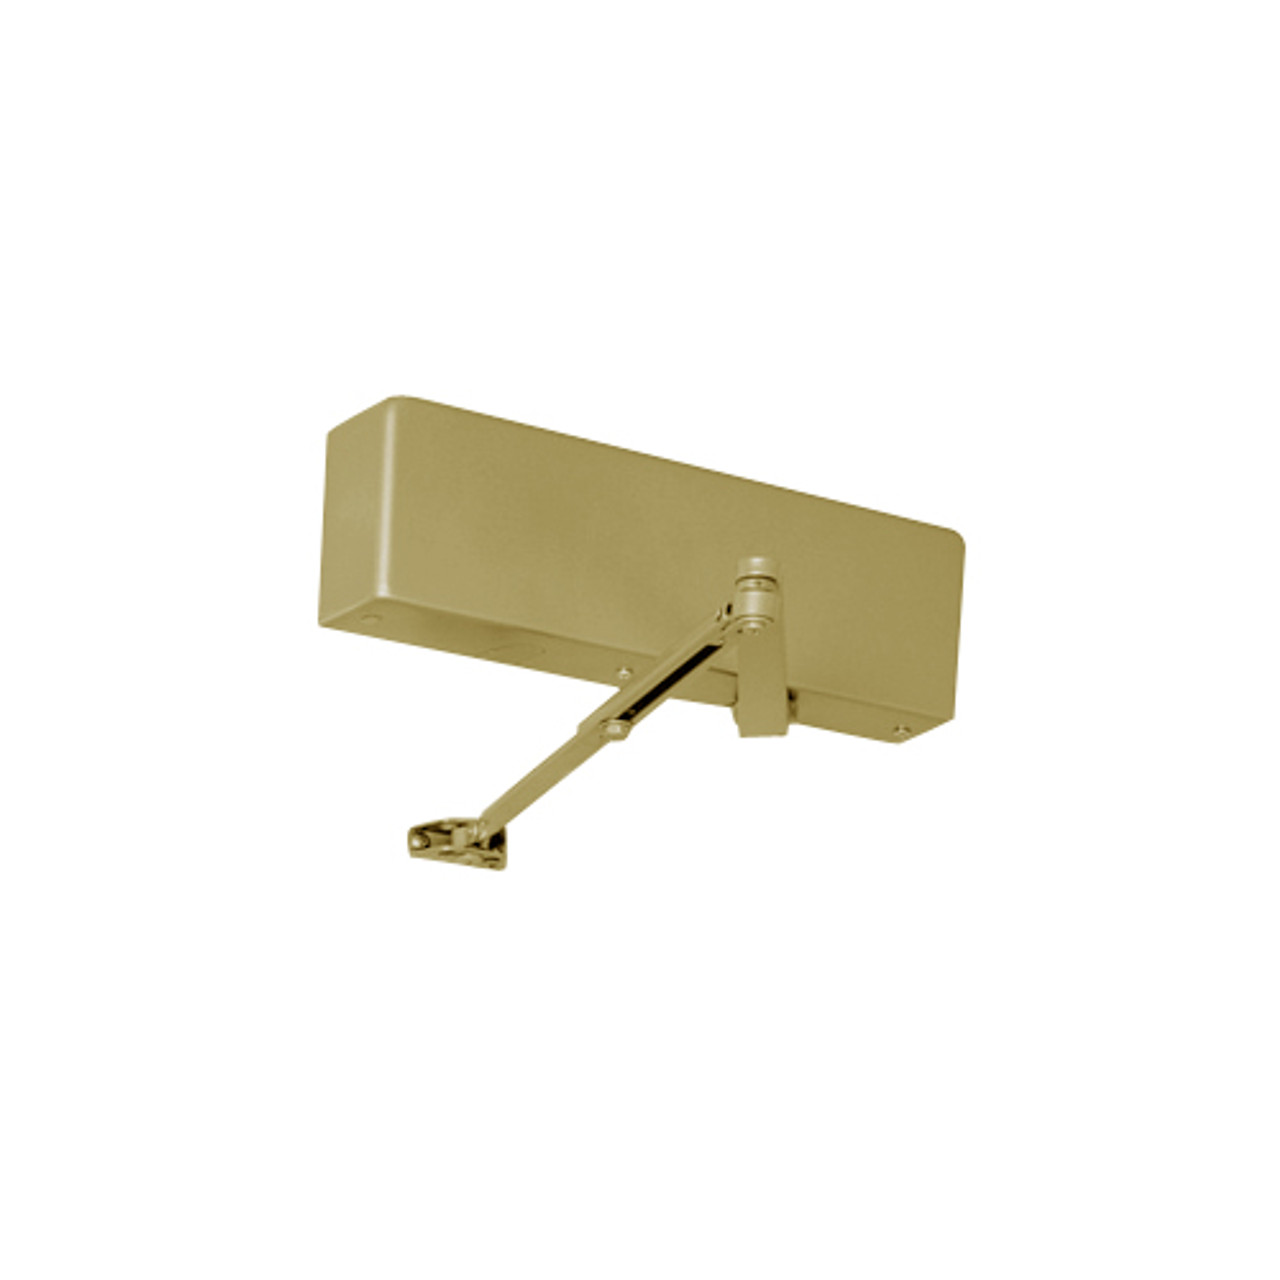 J7530-696 Norton 7500 Series Non-Hold Open Institutional Door Closer with Top Jamb Only Reveals 0 to 3 inch in Gold Finish